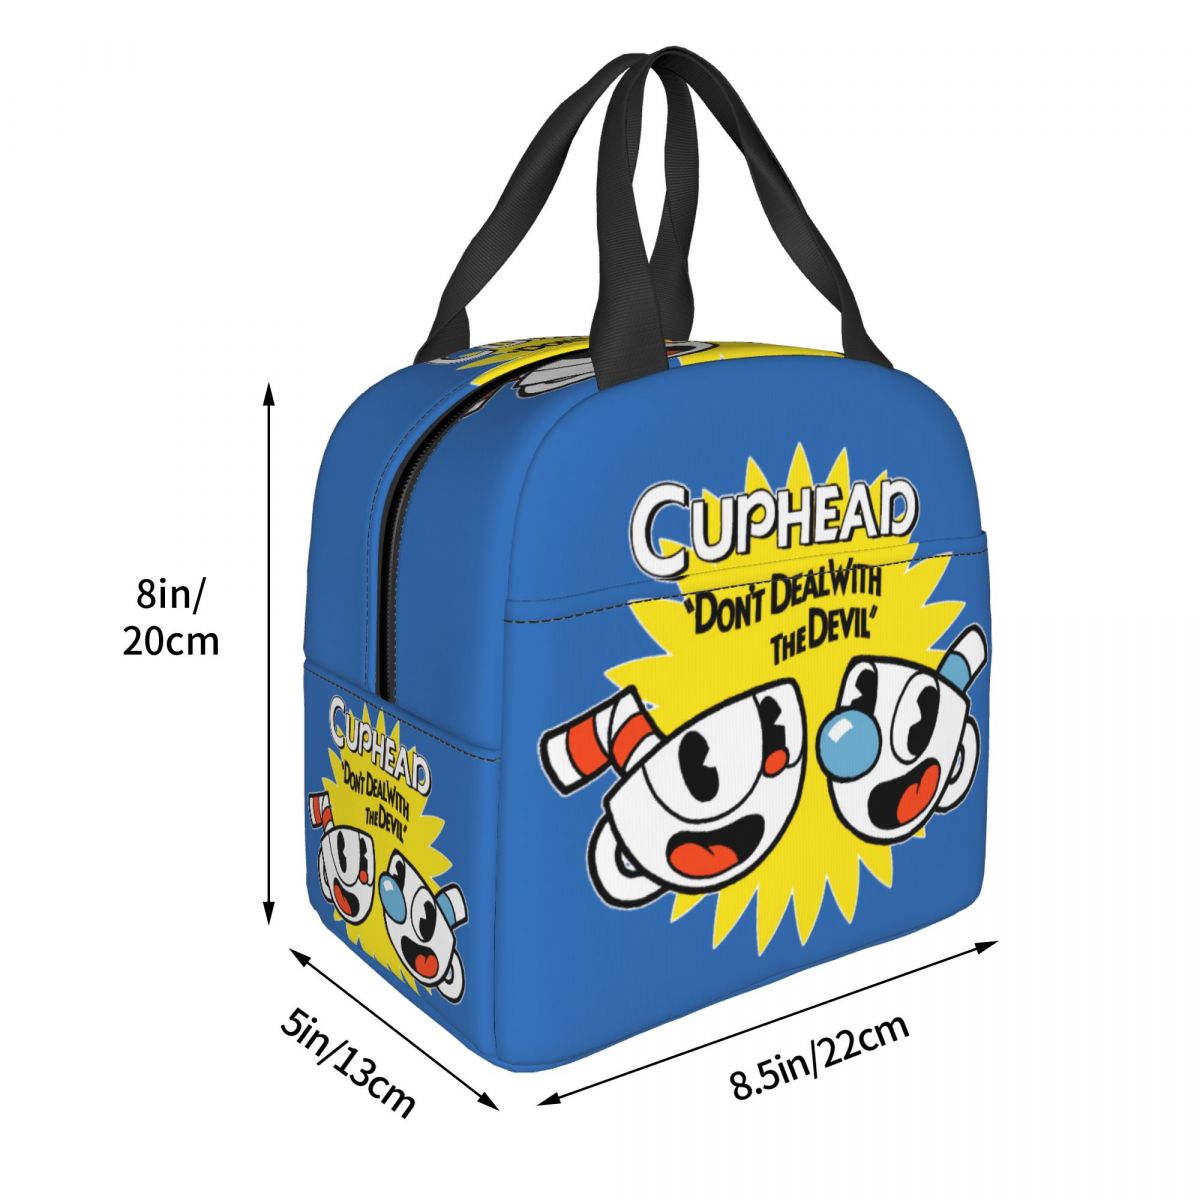 Hot Game Cuphead Mugman Lunch Bag for Women Portable Cooler Thermal Food Insulated Lunch Box Work 2 - Cuphead Plush